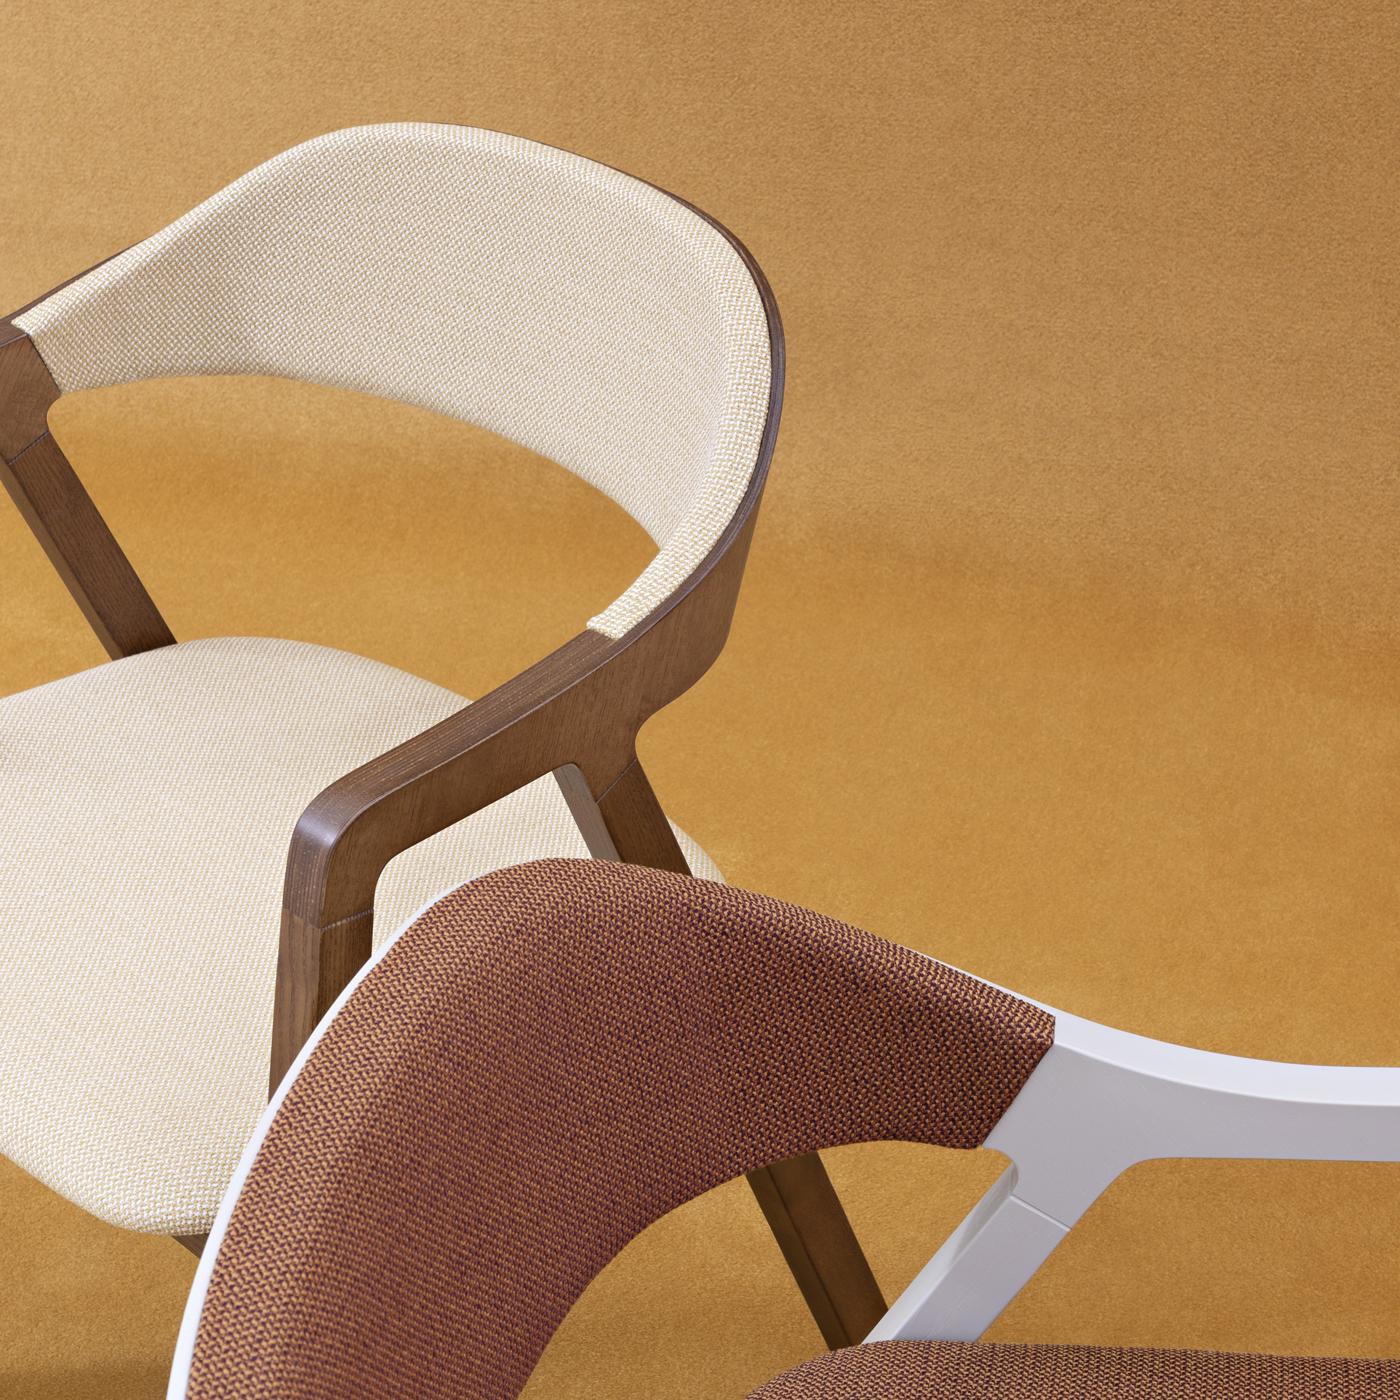 Designed by Michael Geldmacher in 2018, the Layer Chair is characterized by its legs, inspired by an open compass. Featuring smooth transitions between materials and parts, the Layer Chair was designed for fresh, new spaces. A complementary lounge